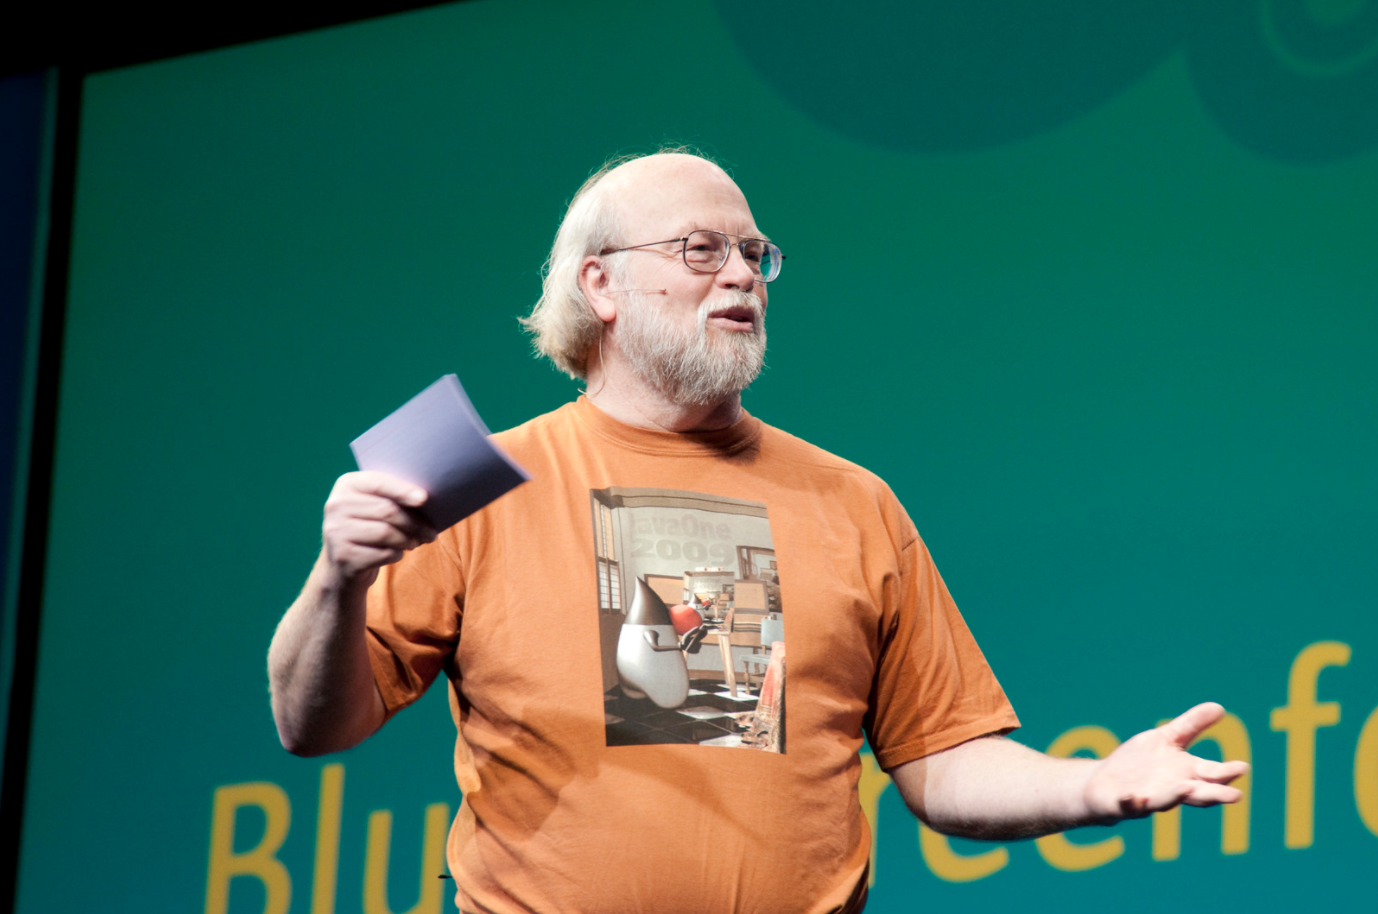 James Gosling gives a presentation about Java at the JavaOne stage